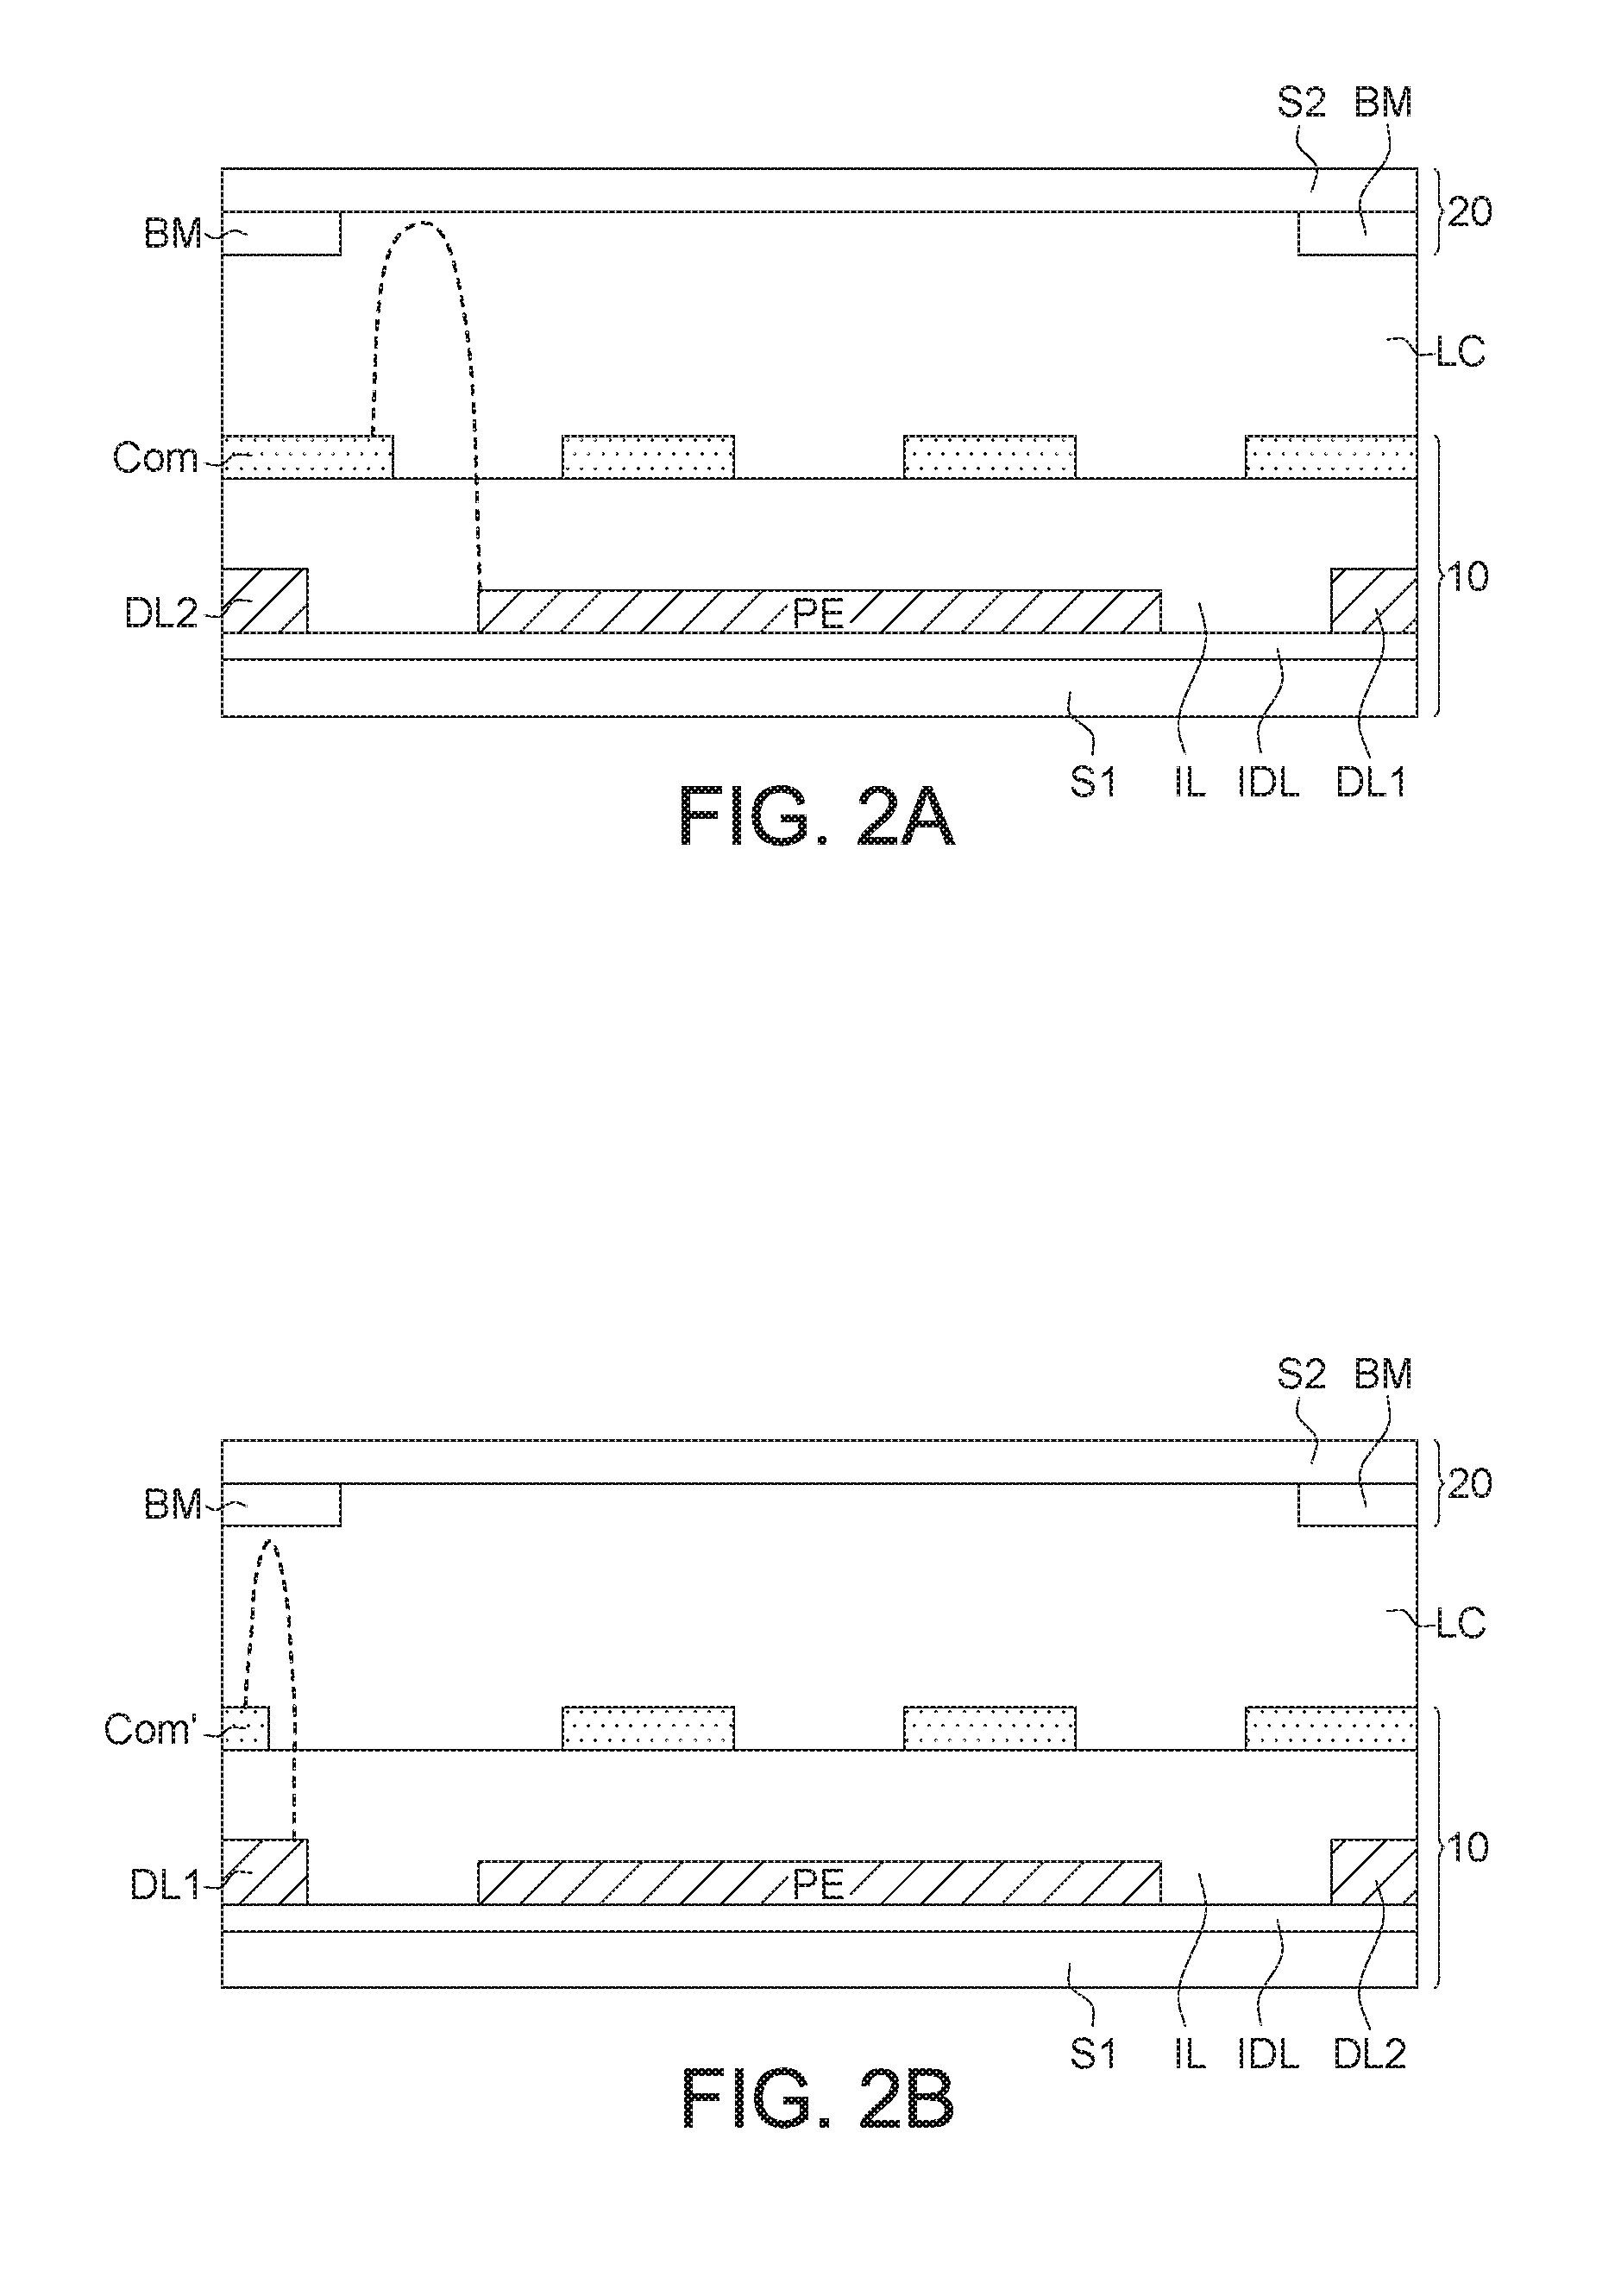 Display apparatus having pattern of slits on top-common electrode